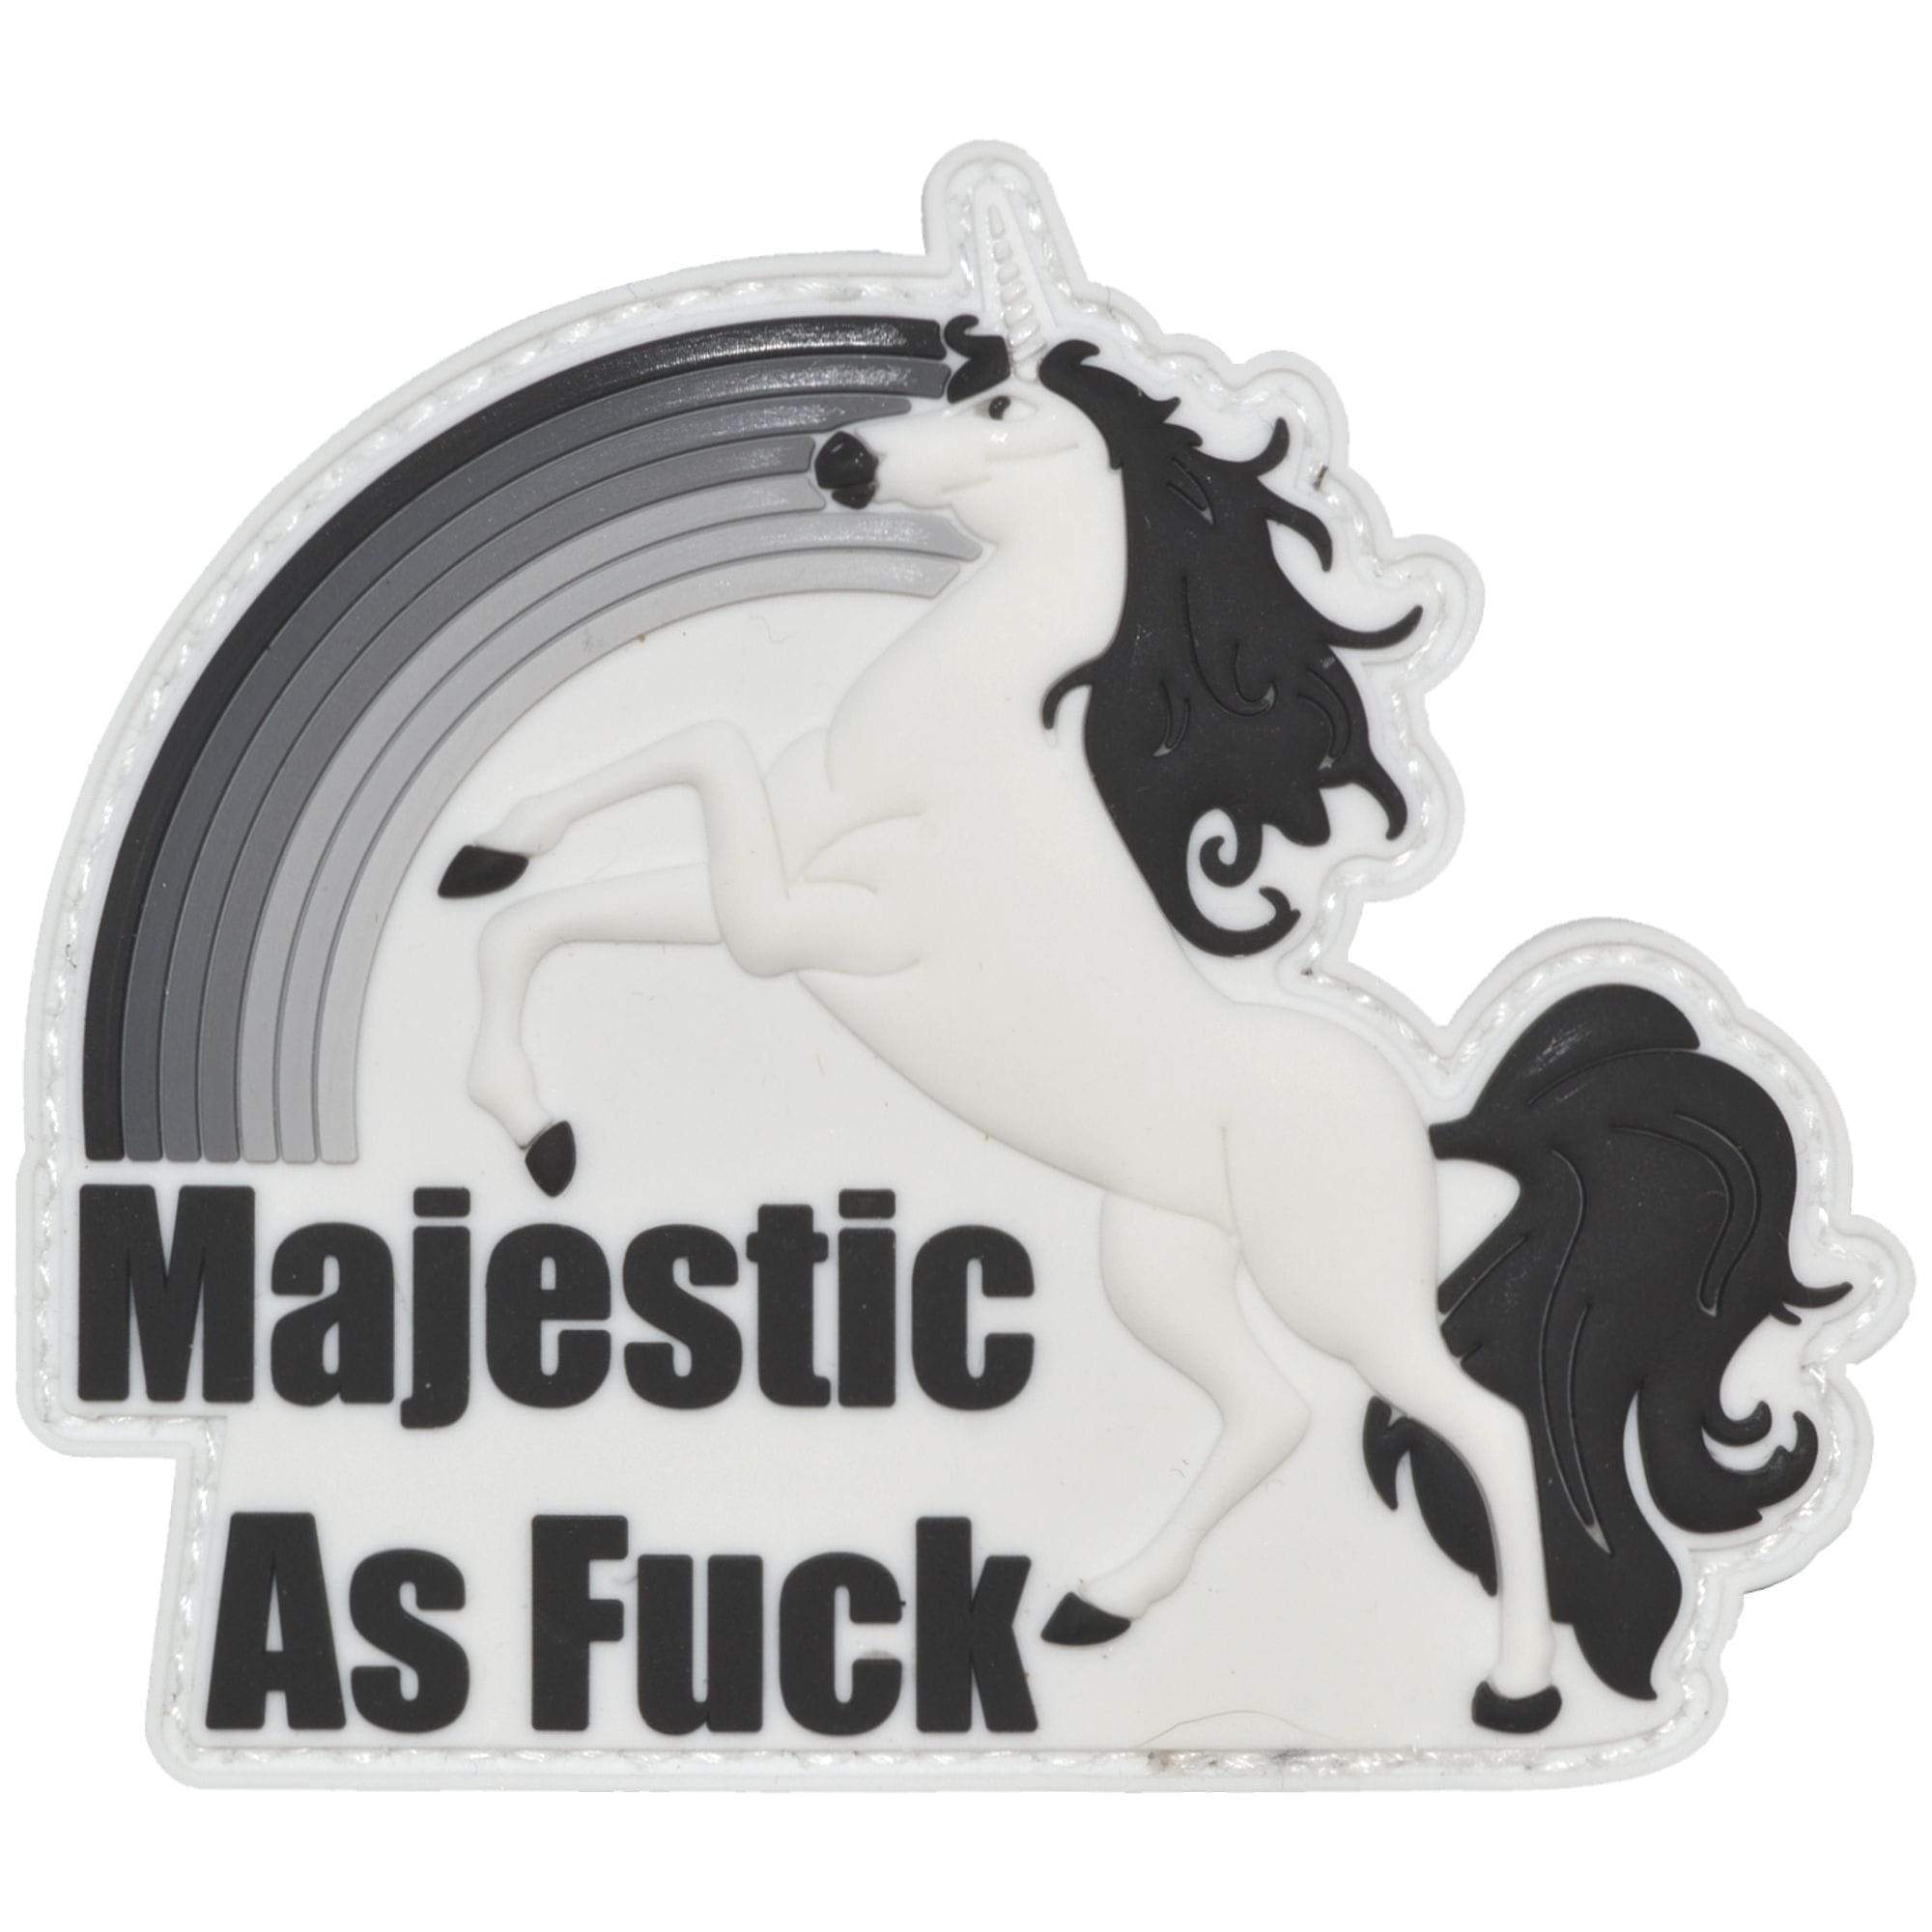 Tactical Gear Junkie Patches Black Majestic As Fuck Unicorn - 3.5 inch PVC Patch - Multiple Colors